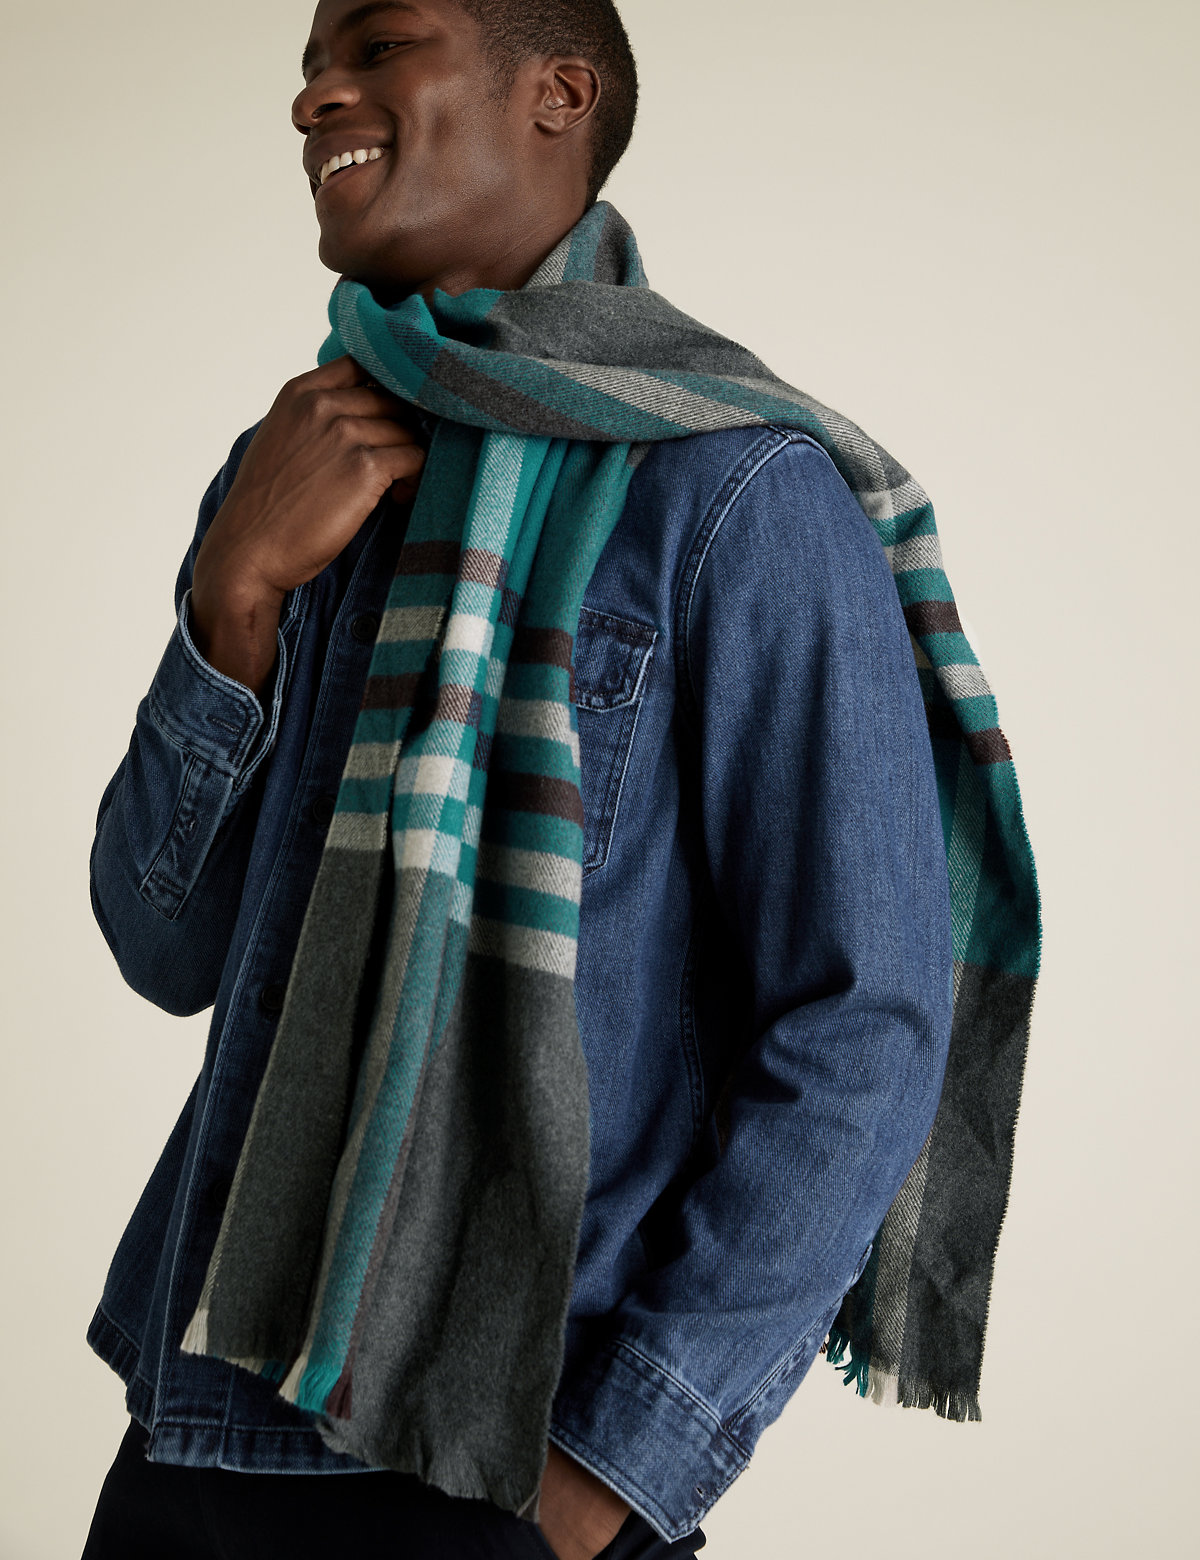 Wider Width Checked Scarf